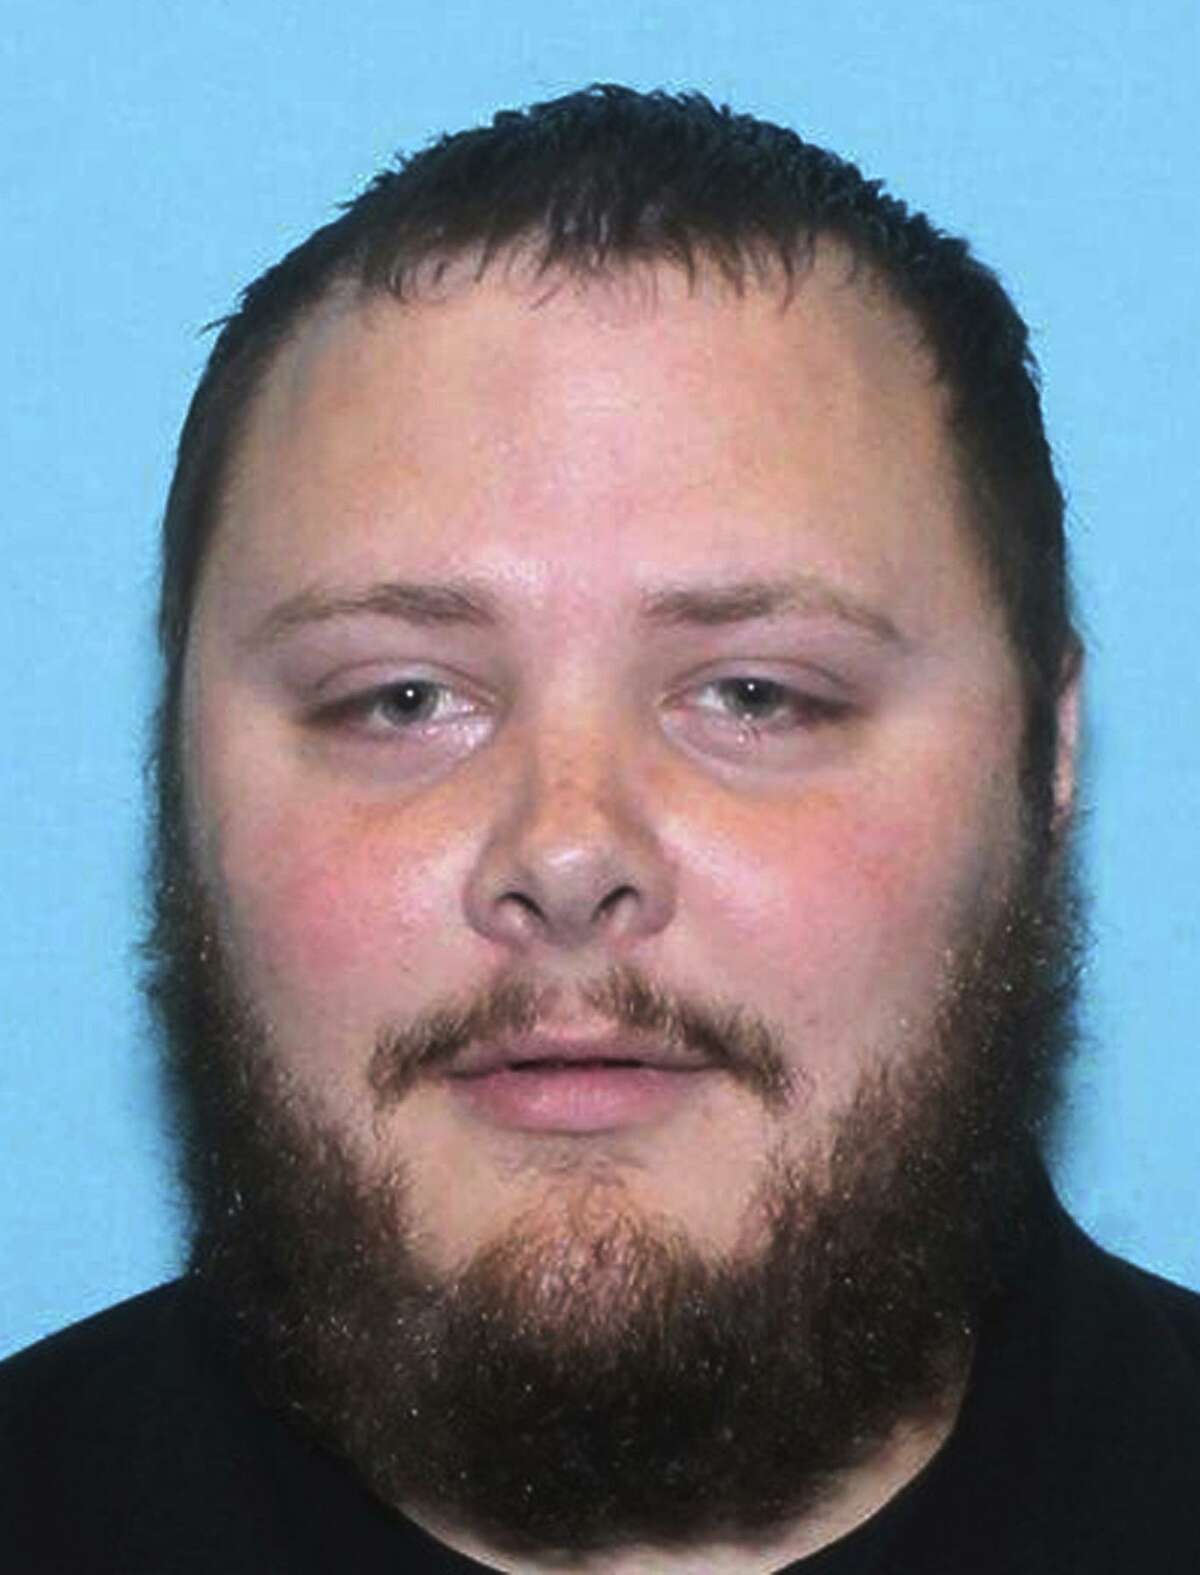 FILE - This undated file photo provided by the Texas Department of Public Safety shows Devin Patrick Kelley, the suspect in the shooting at First Baptist Church in Sutherland Springs, Texas, on Sunday, Nov. 5, 2017. The Air Force says its failure to report the criminal history of the former airman who massacred 26 people at a Texas church in early November was part of a pattern of such lapses. But it's not yet clear how widespread it was. In a statement on Nov. 28, the Air Force blamed failures in "training and compliance measures" for the lapse involving Kelley, who had been convicted of assault in 2012. (Texas Department of Public Safety via AP, File)